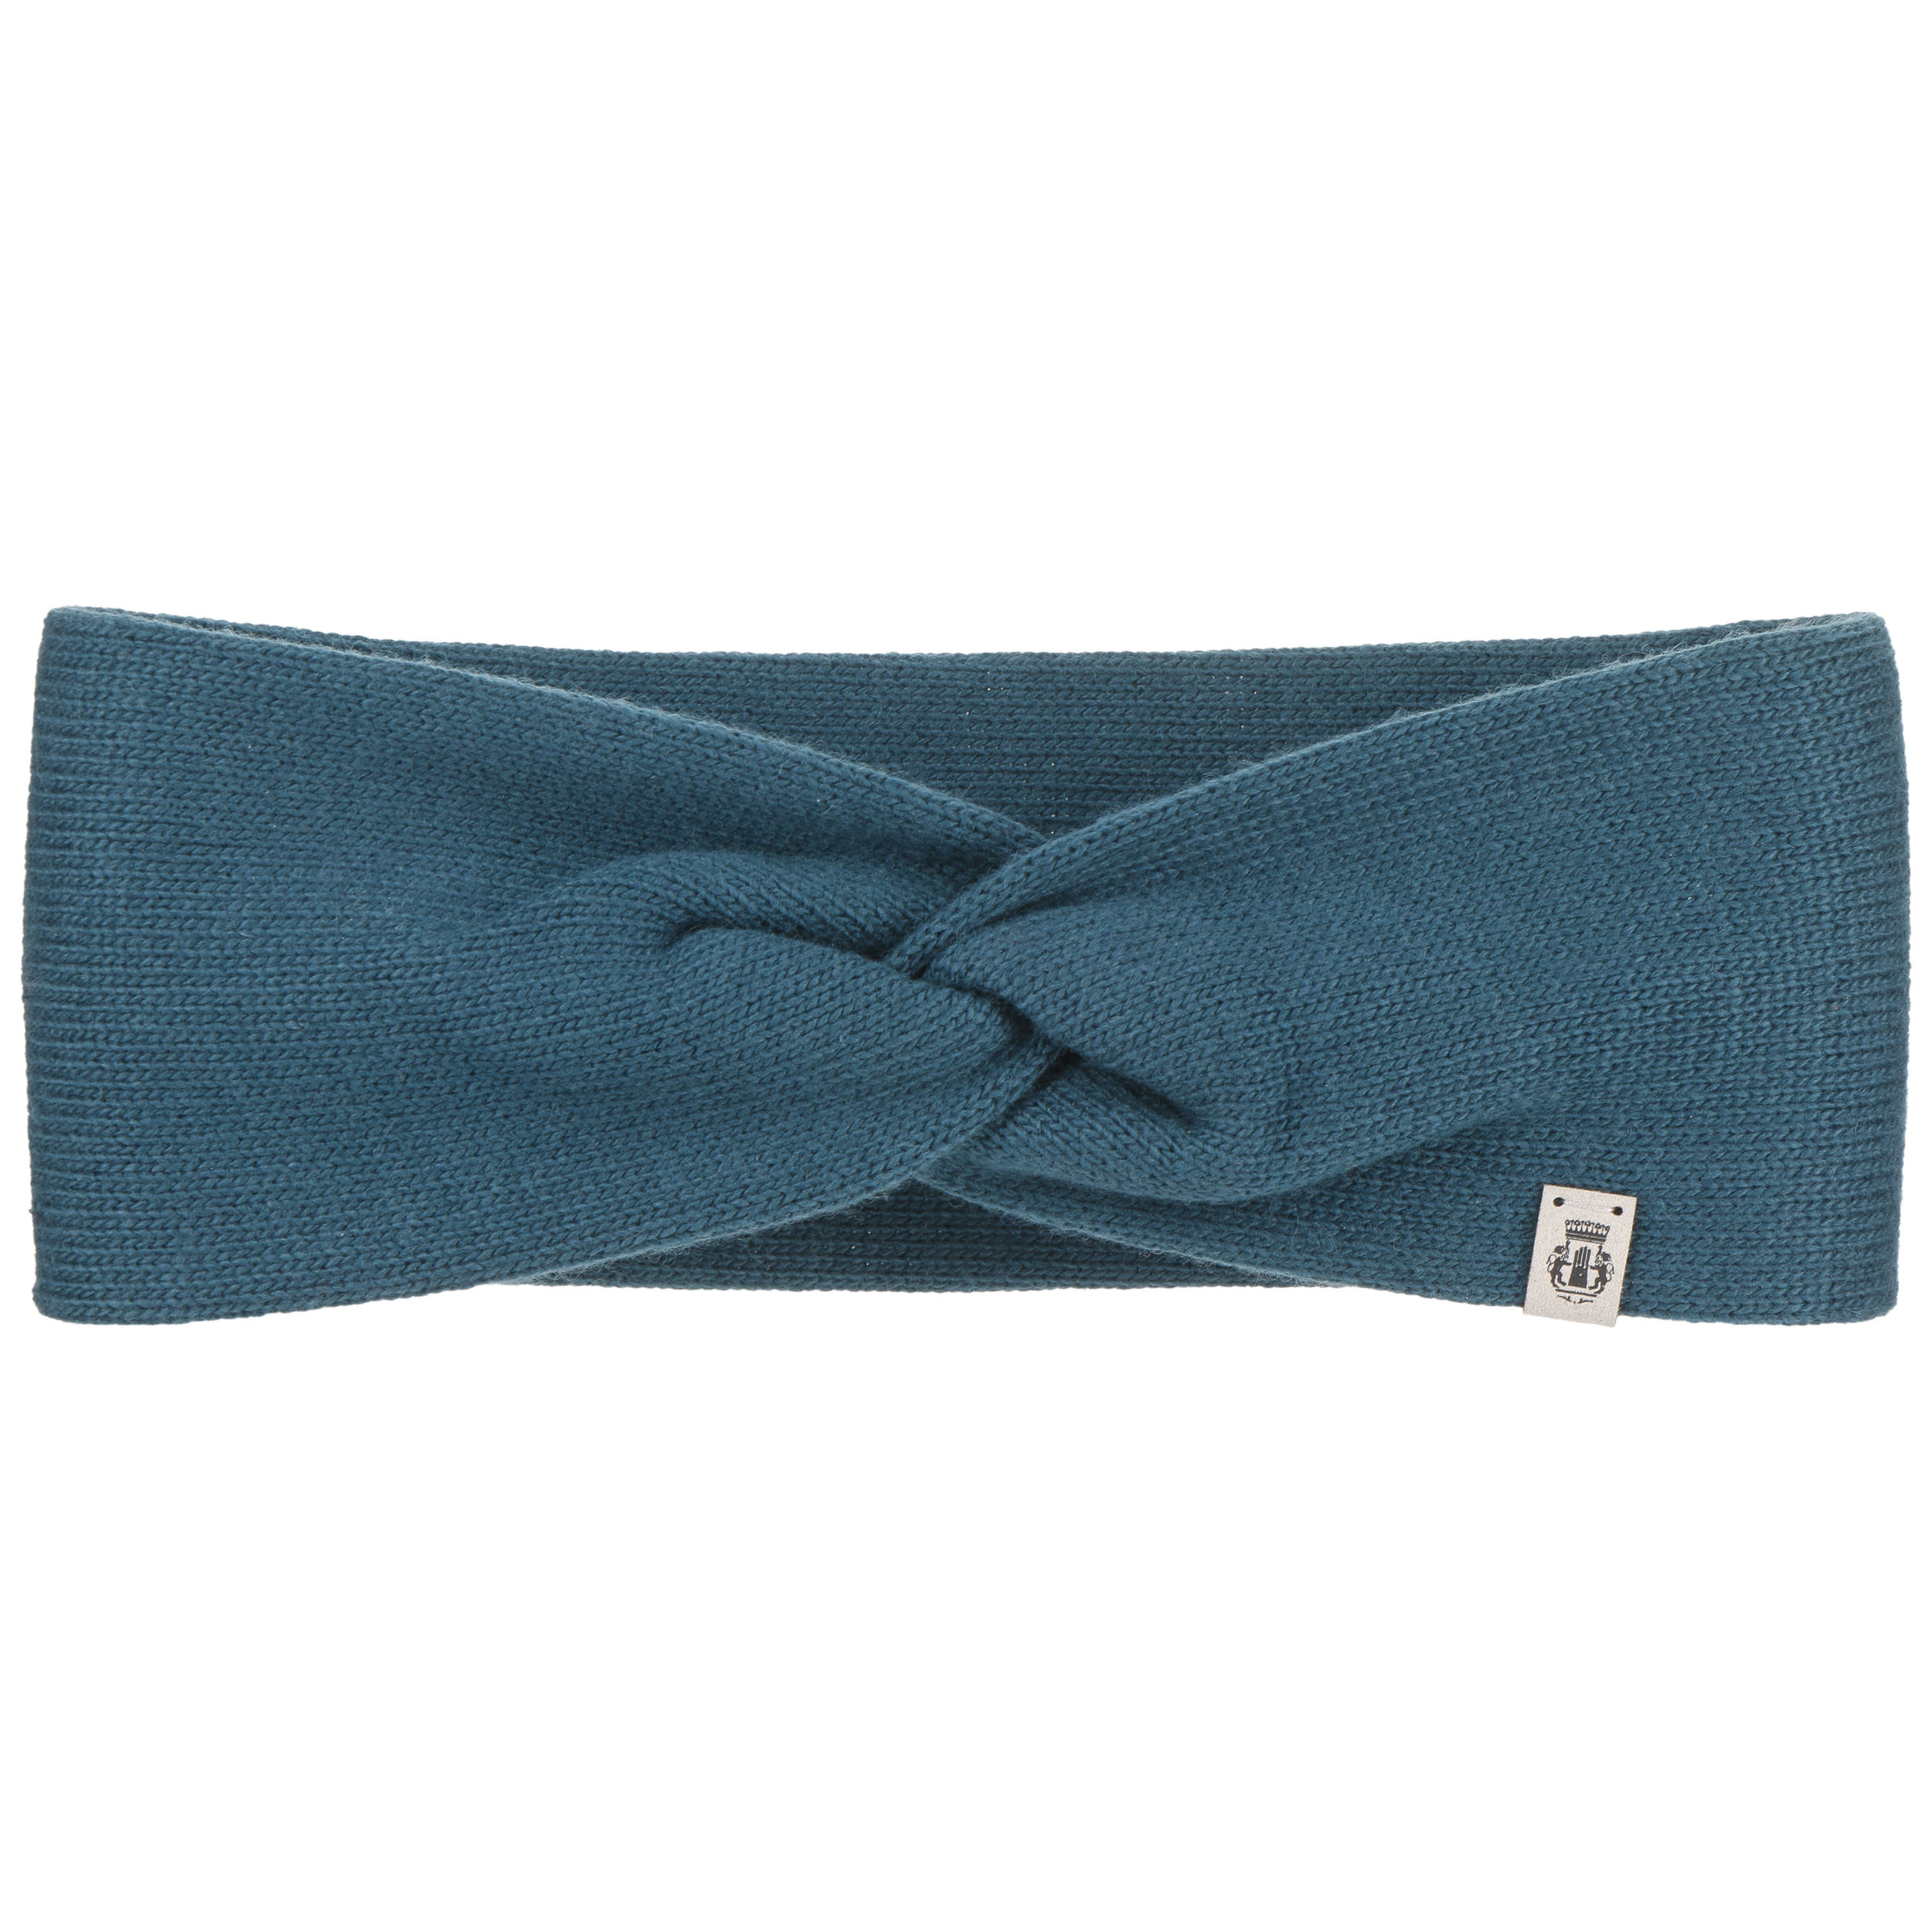 Pure Cashmere Headband by Roeckl --> Shop Hats, Beanies & Caps online ▷  Hatshopping